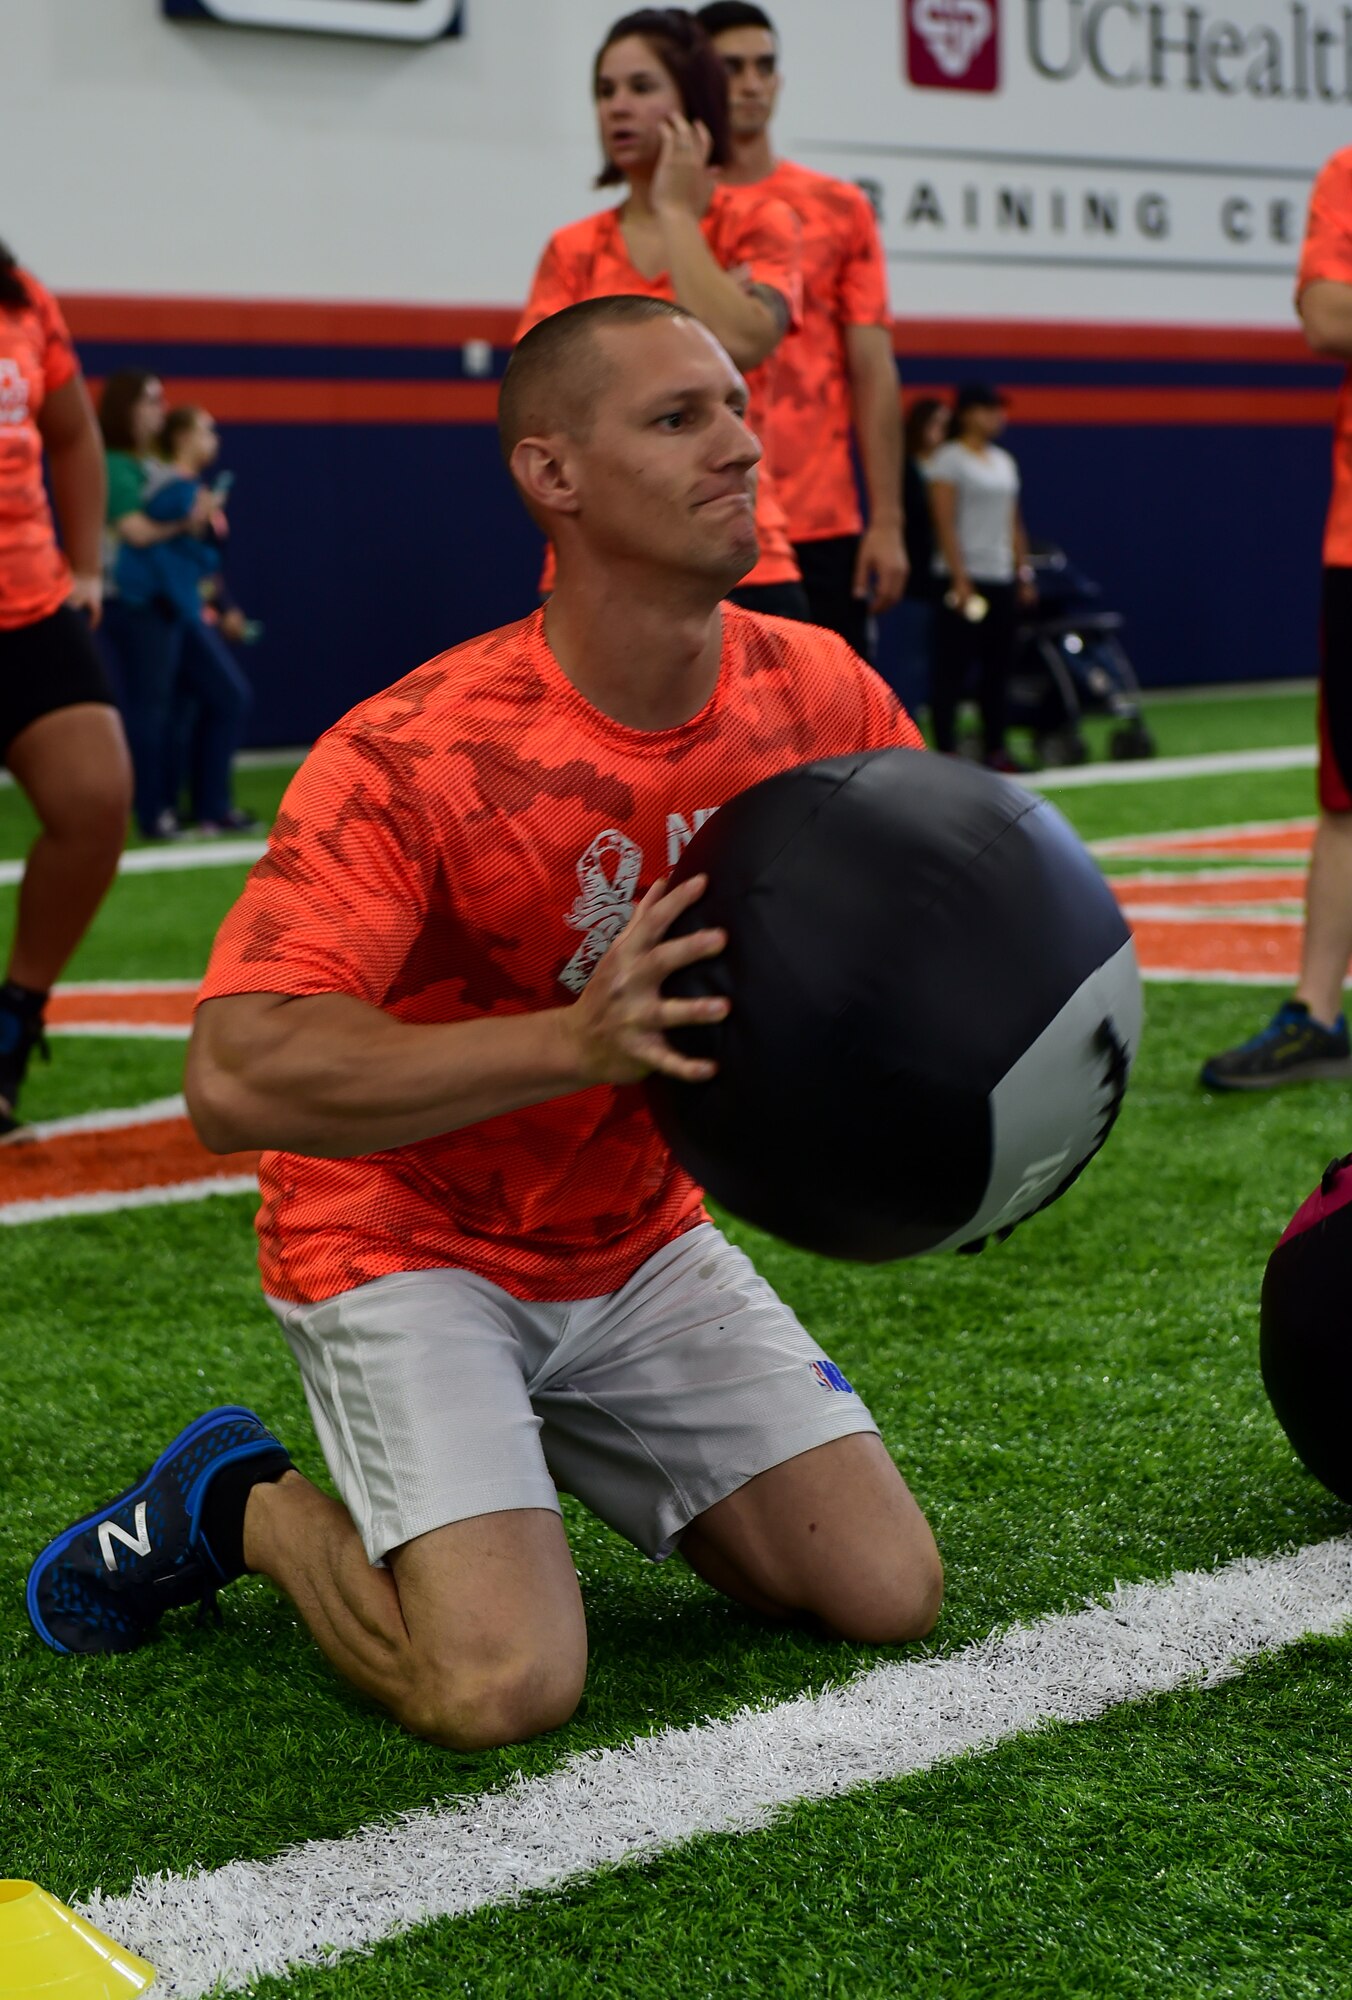 Staff Sgt. Matthew Campbell, 460th Medical Support Squadron logistics NCO in charge, throws a medicine ball during a kneeling power ball launch of a military training camp at the Denver Broncos’ University of Colorado Health Training Center Fieldhouse in Englewood, Colo., August 25, 2016. Team Buckley won the military camp competition after participating in five head-to-head challenges including: team ball catching, a gauntlet, tackling dummy relay, sled push and the kneeling power ball launch. (U.S. Air Force photo by Airman 1st Class Gabrielle Spradling/Released)